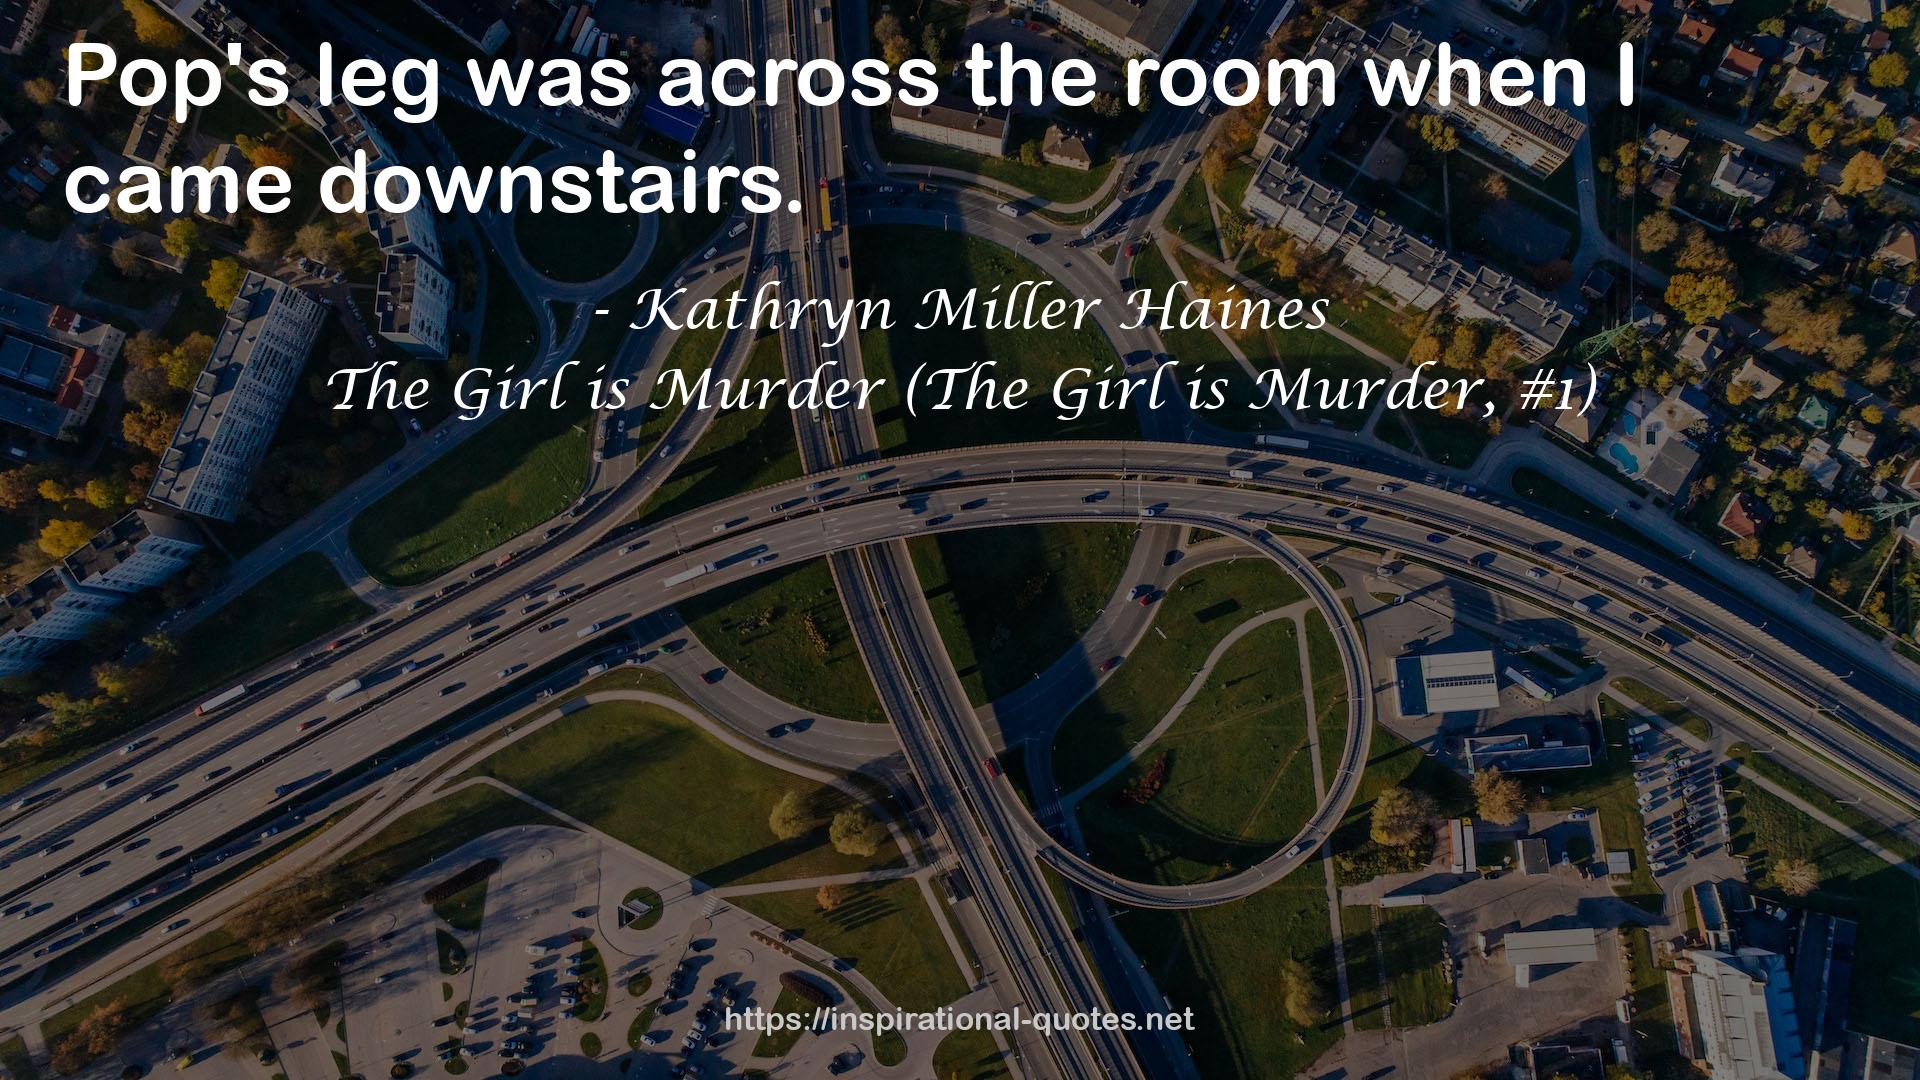 The Girl is Murder (The Girl is Murder, #1) QUOTES